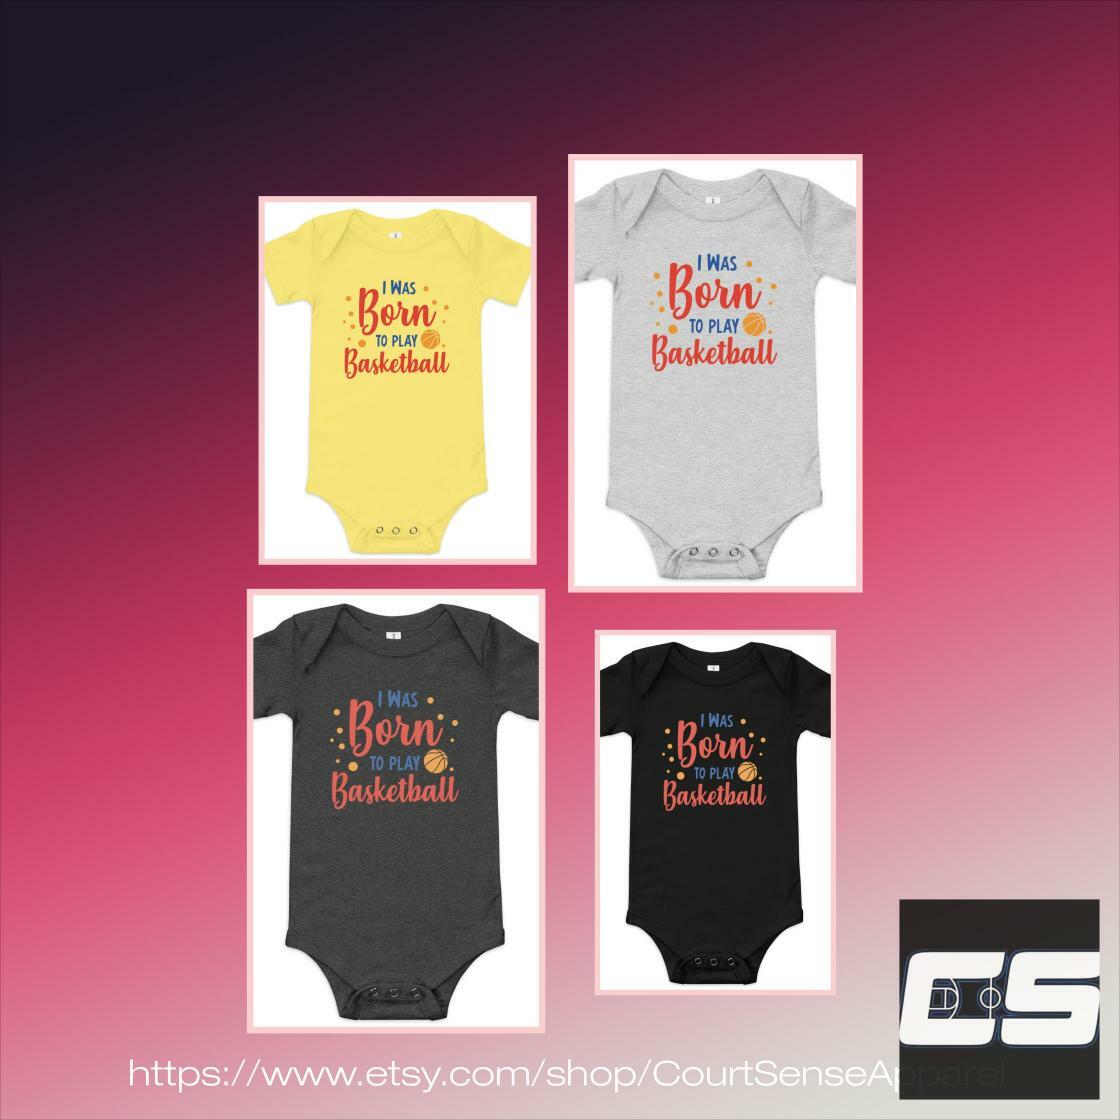 Limited offer! This awesome Born to Play Baby Onesie for $22.00.. 
etsy.com/listing/142711…
#ShowerGift #BabyClothing